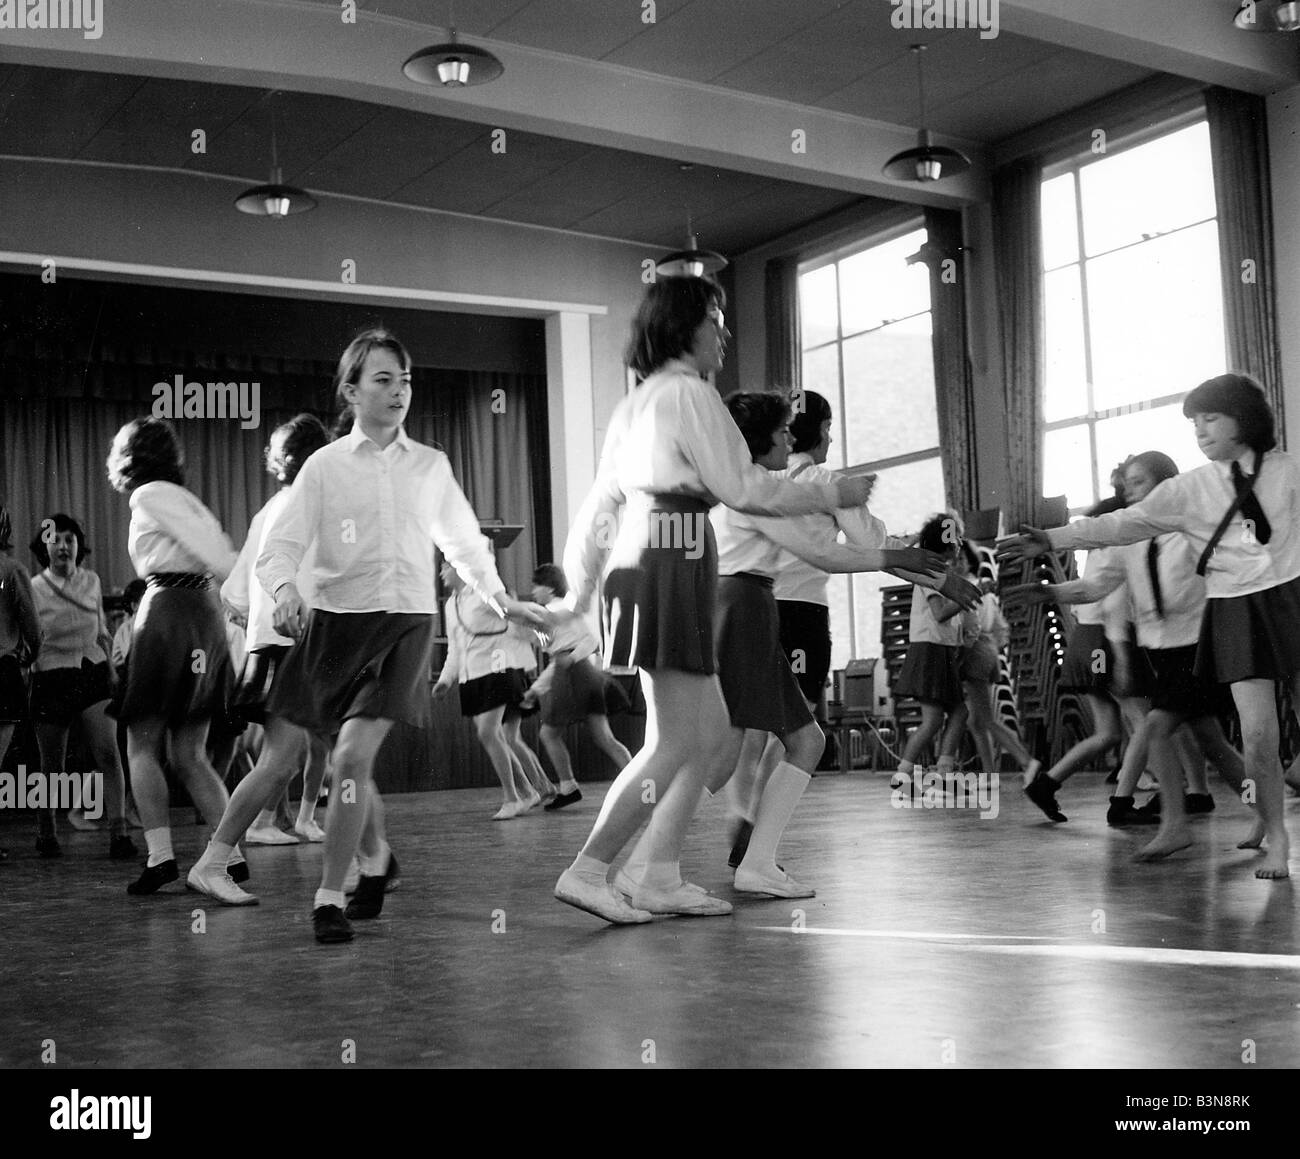 EDUCATION Dance class at a southern England school about 1985 Stock Photo